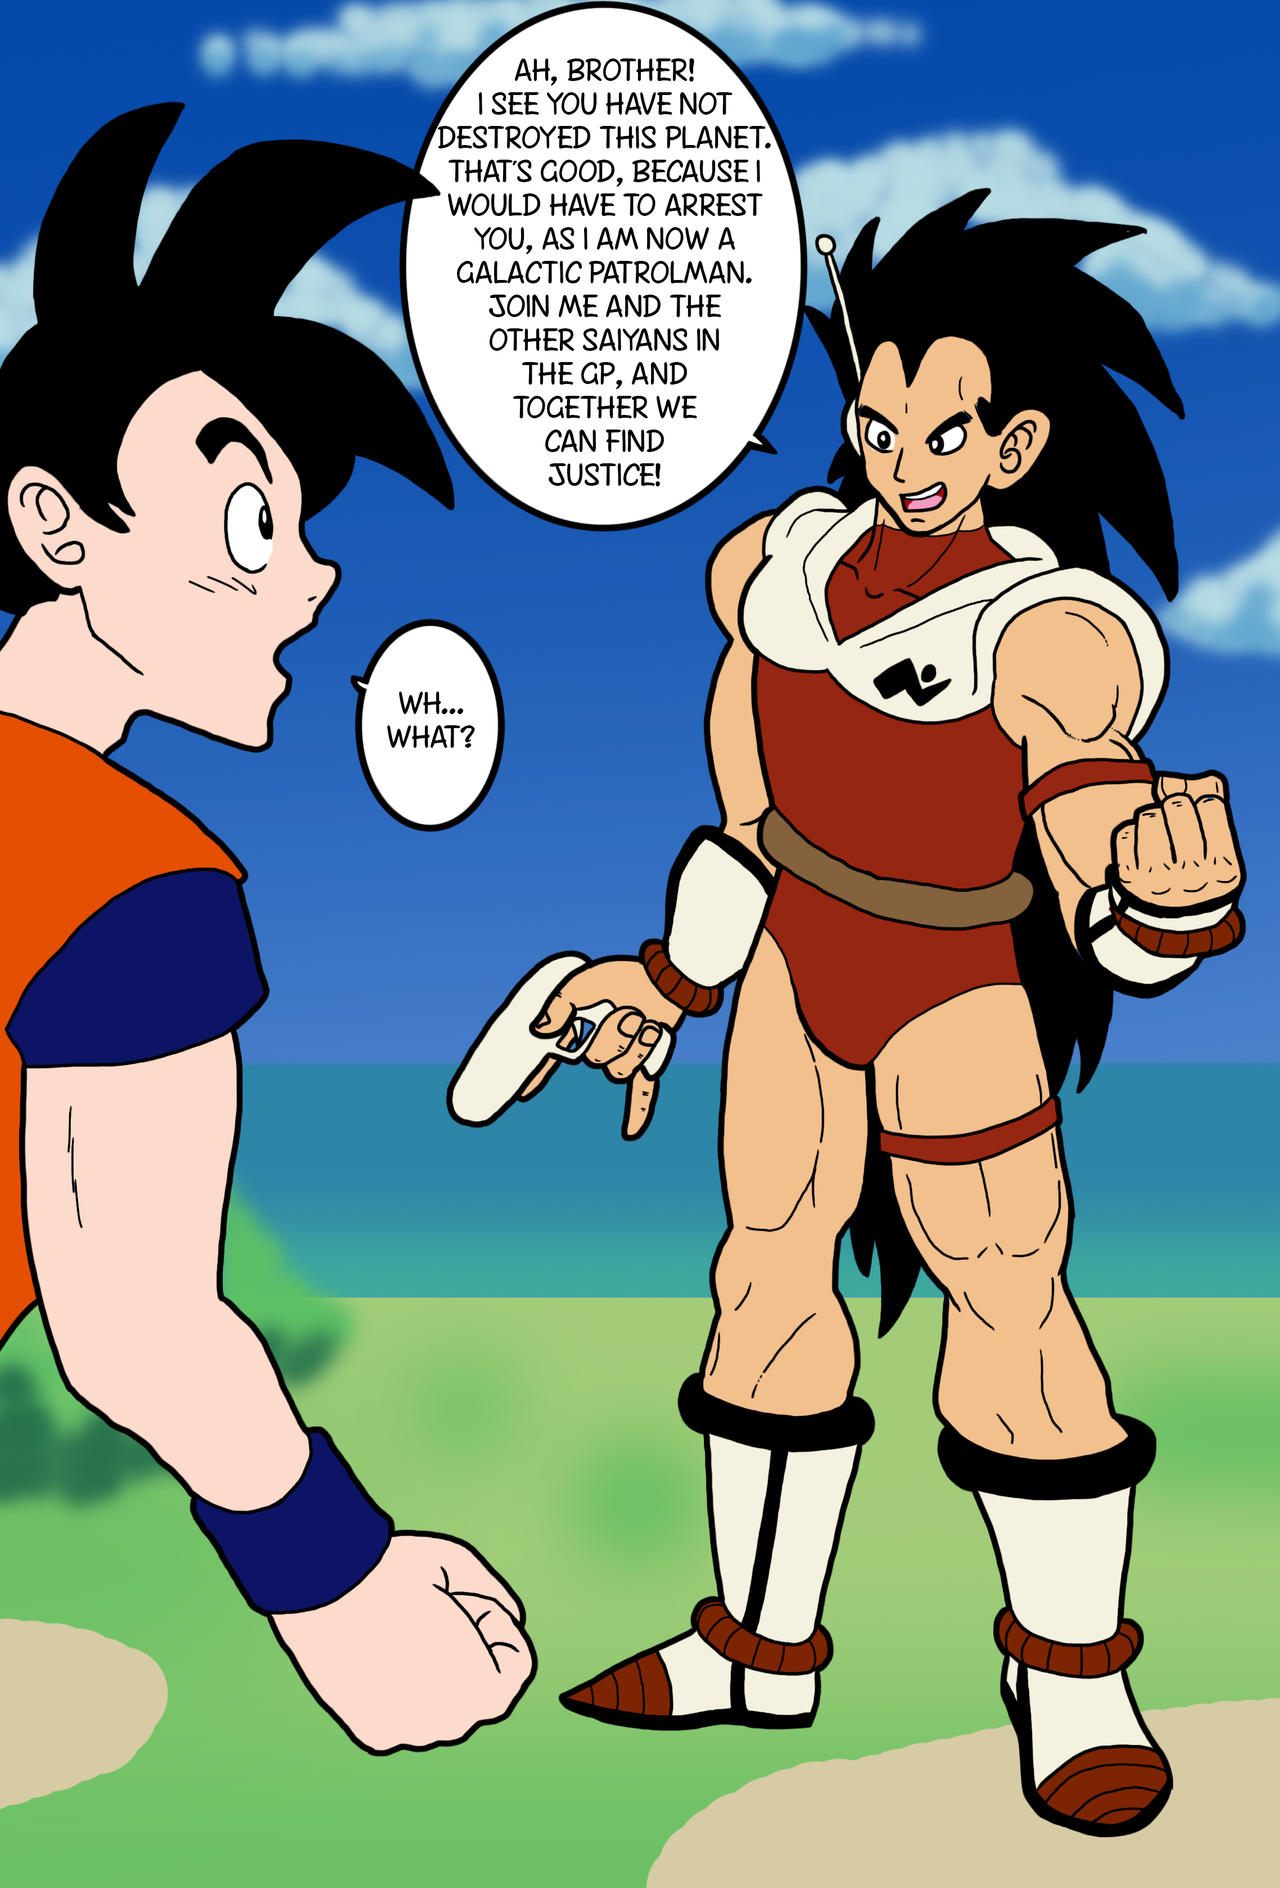 Where were Vegeta, Nappa, and Raditz when their planet was